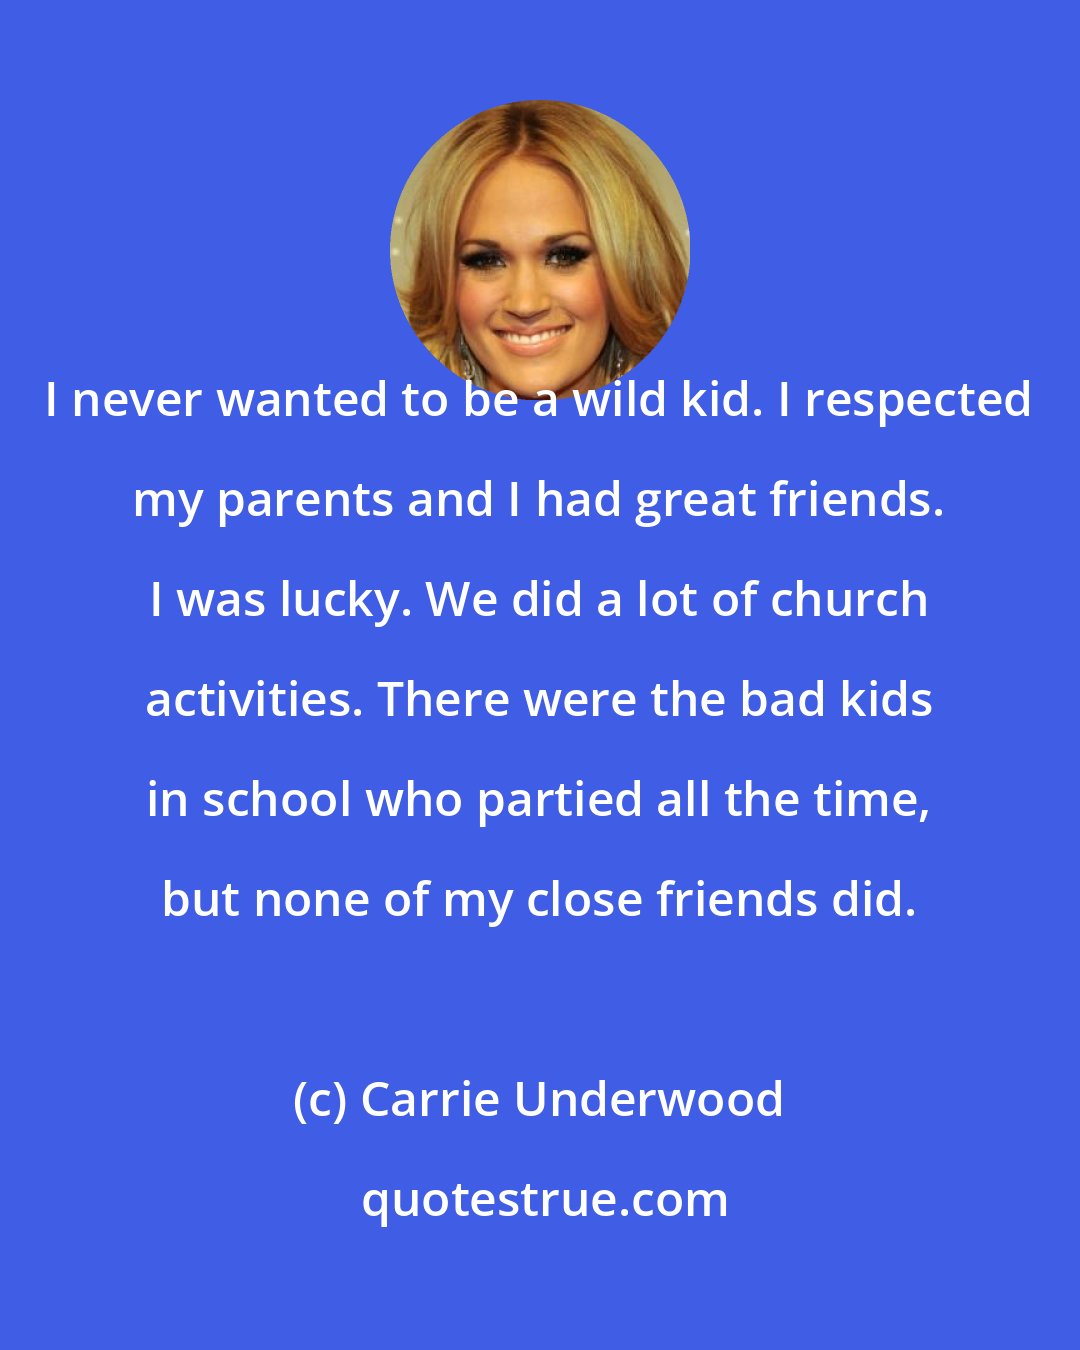 Carrie Underwood: I never wanted to be a wild kid. I respected my parents and I had great friends. I was lucky. We did a lot of church activities. There were the bad kids in school who partied all the time, but none of my close friends did.